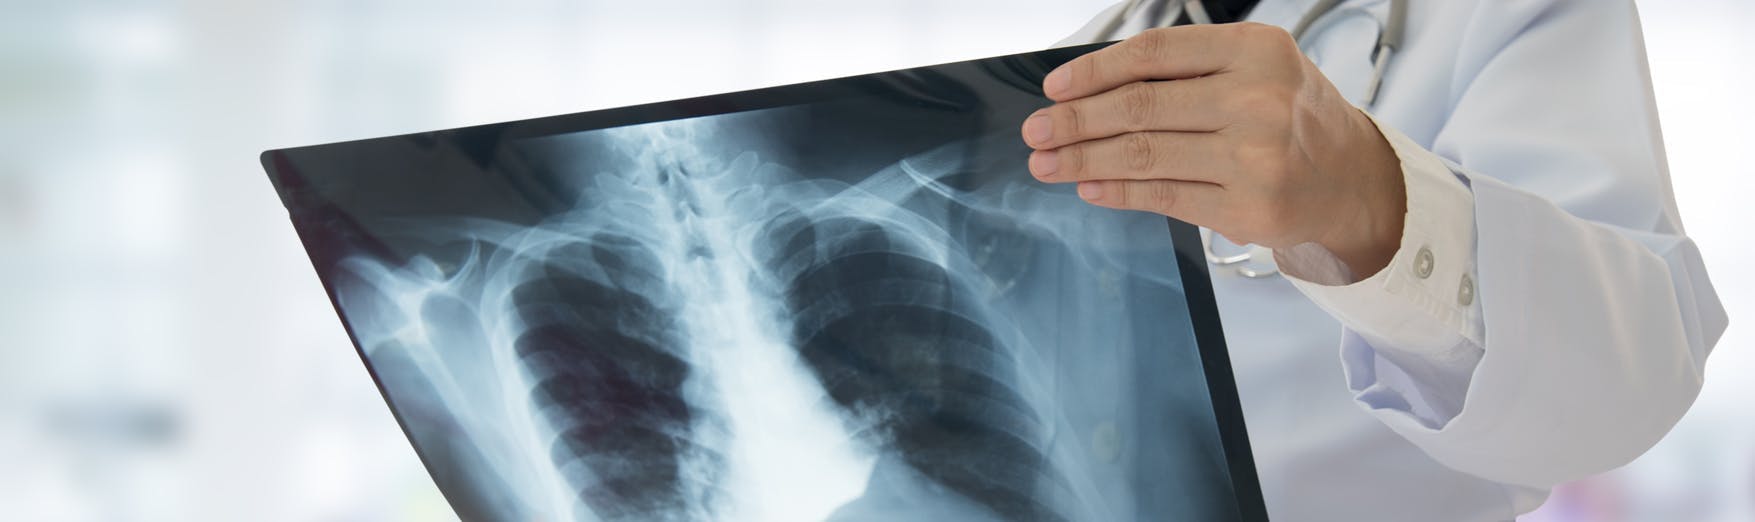 A medical professional holding a chest xray